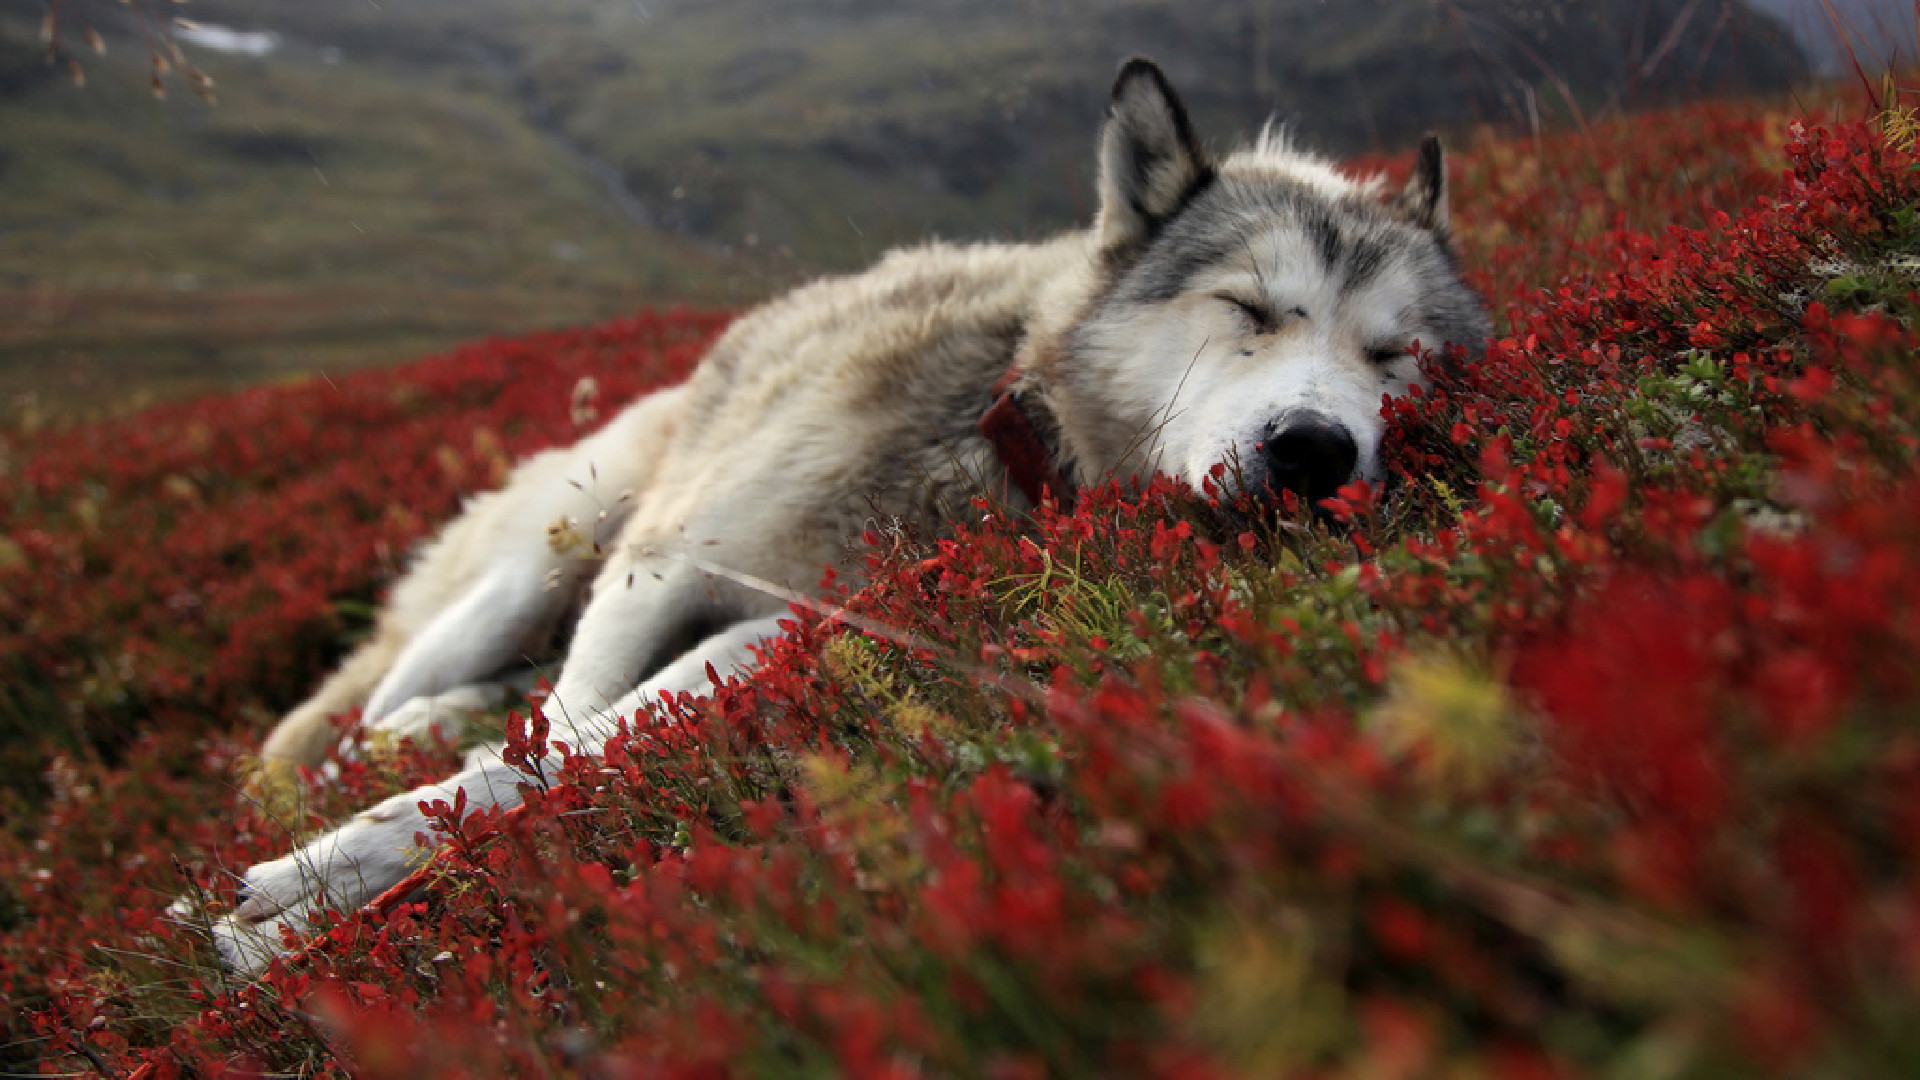 animals, Wolf, Wolves, Canines, Fur, Sleep, Rest, Prone, Face, Wildlife, Life, Predator, Nature, Landscapes, Artic, Tundra, Plants, Flowers, Hills, Mountains Wallpaper